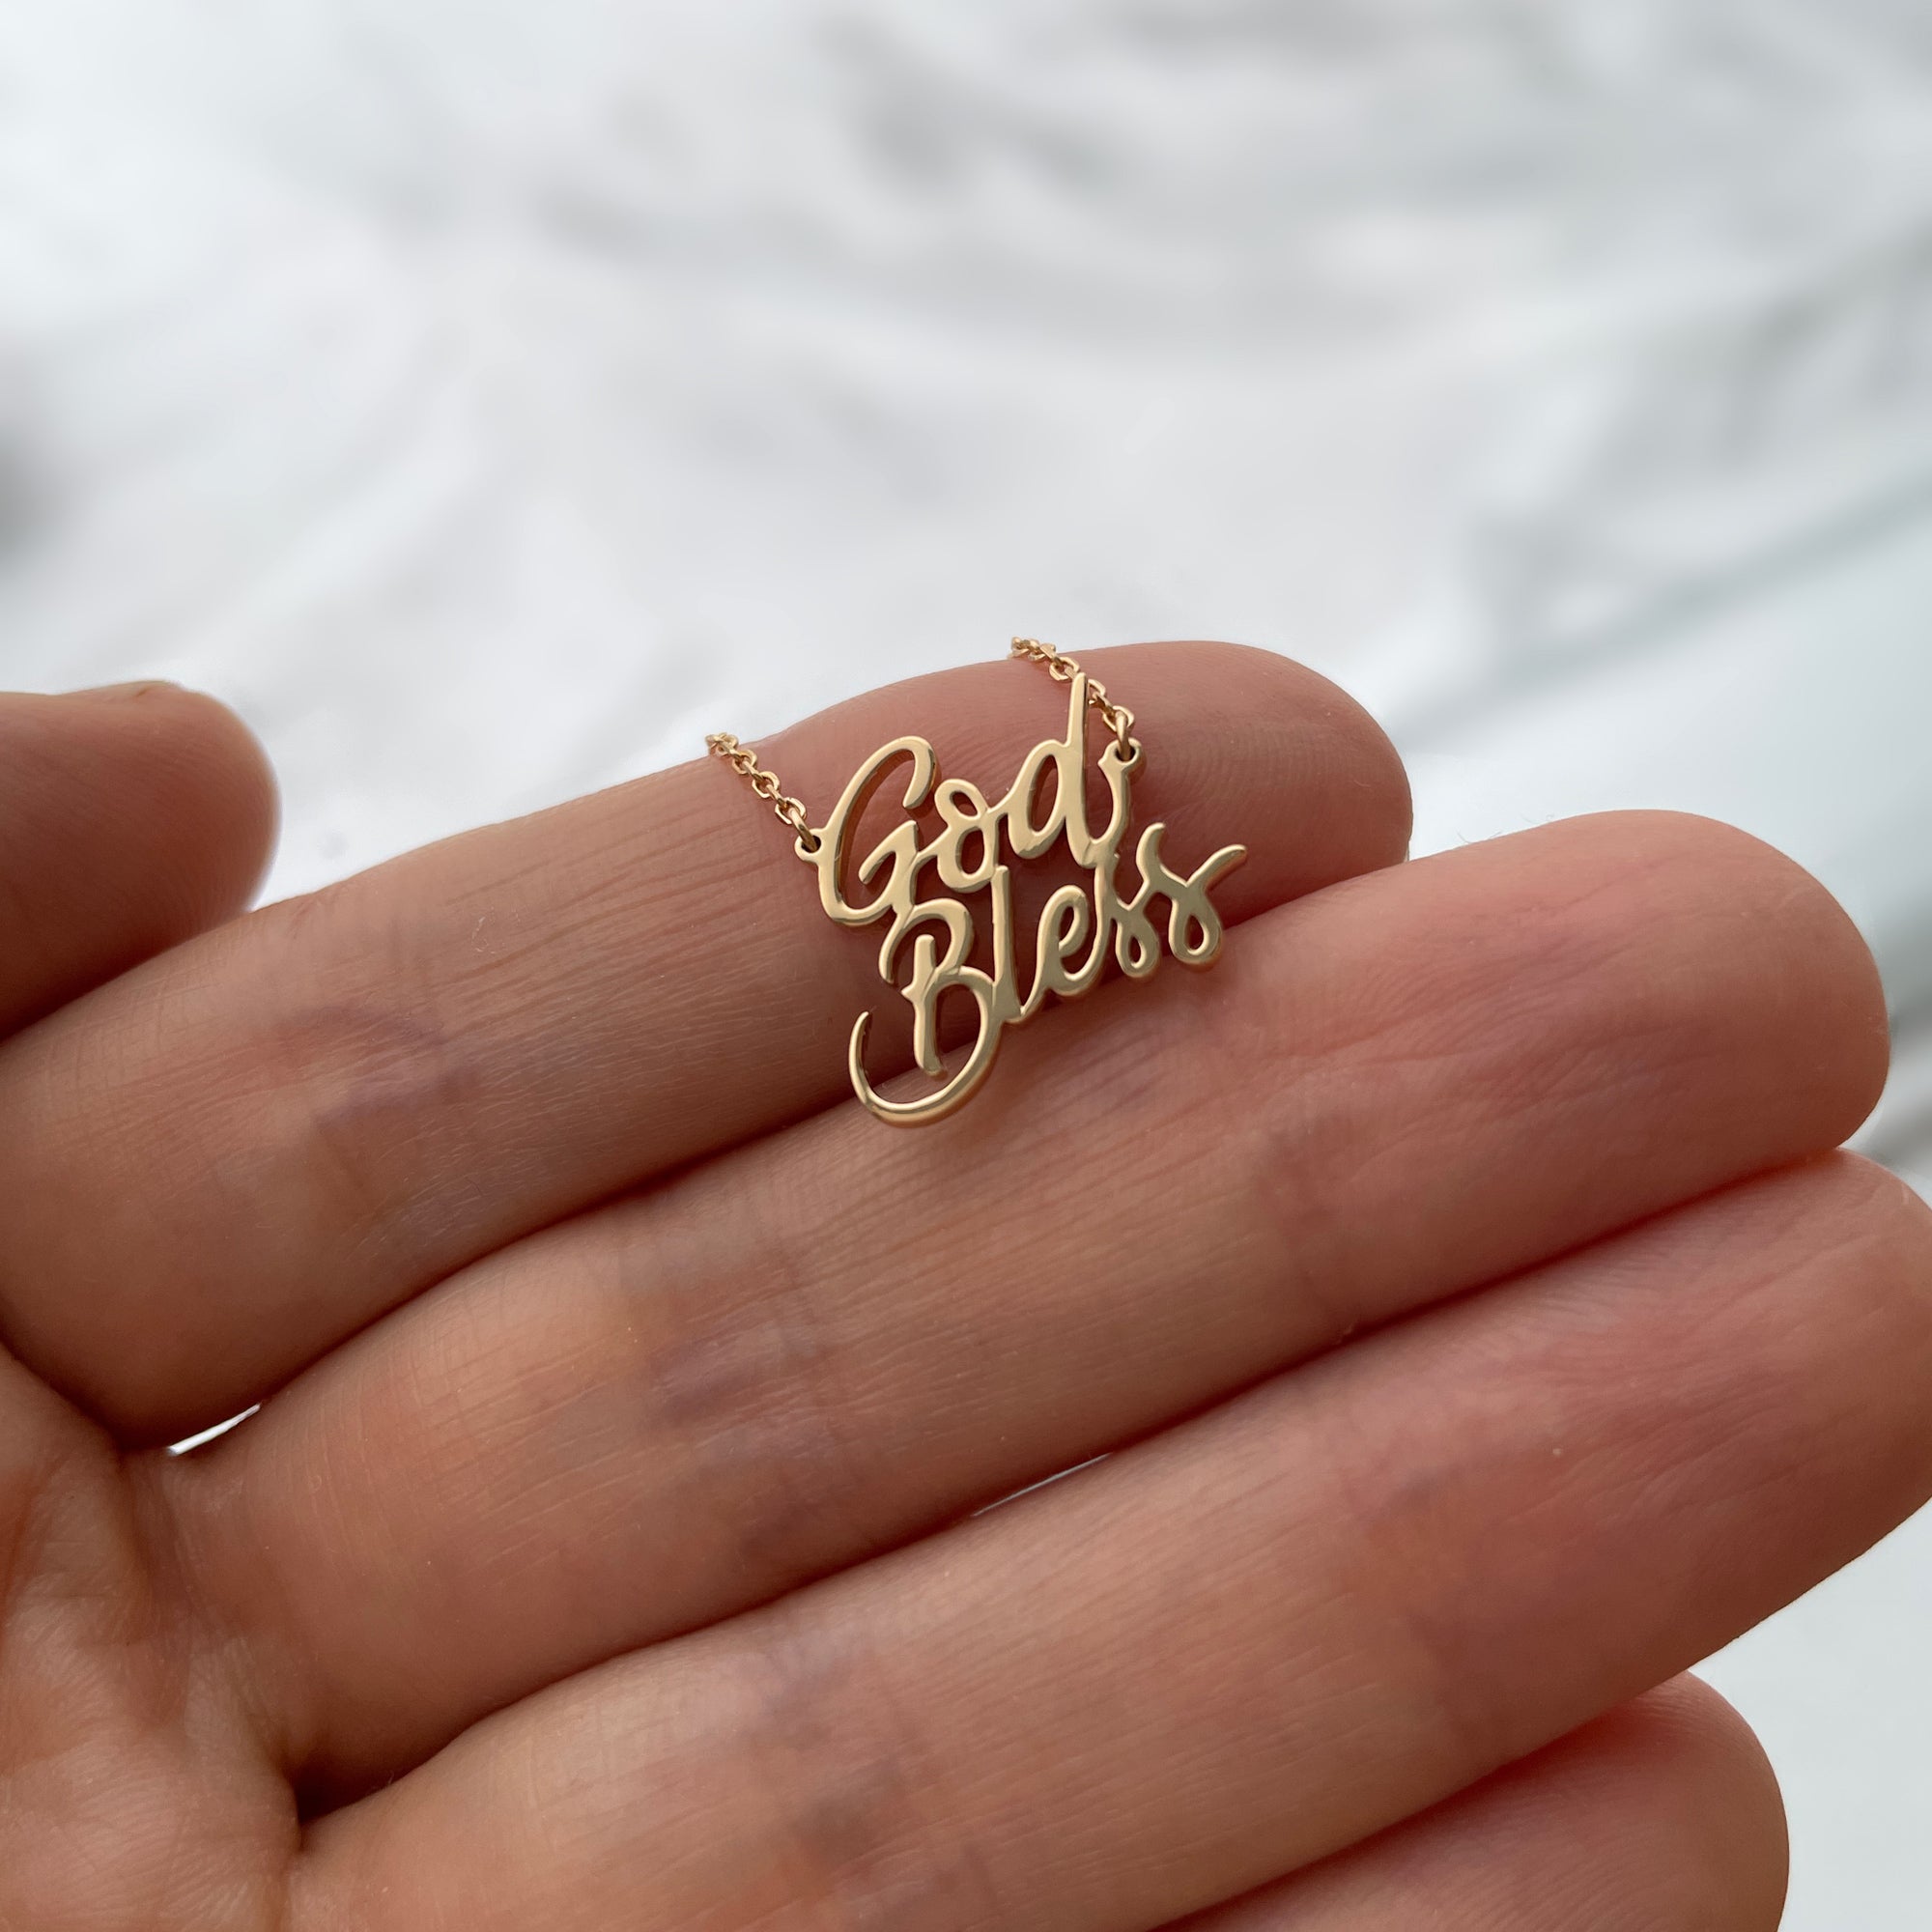 God Bless | Pendant Necklace – Walking By Faith